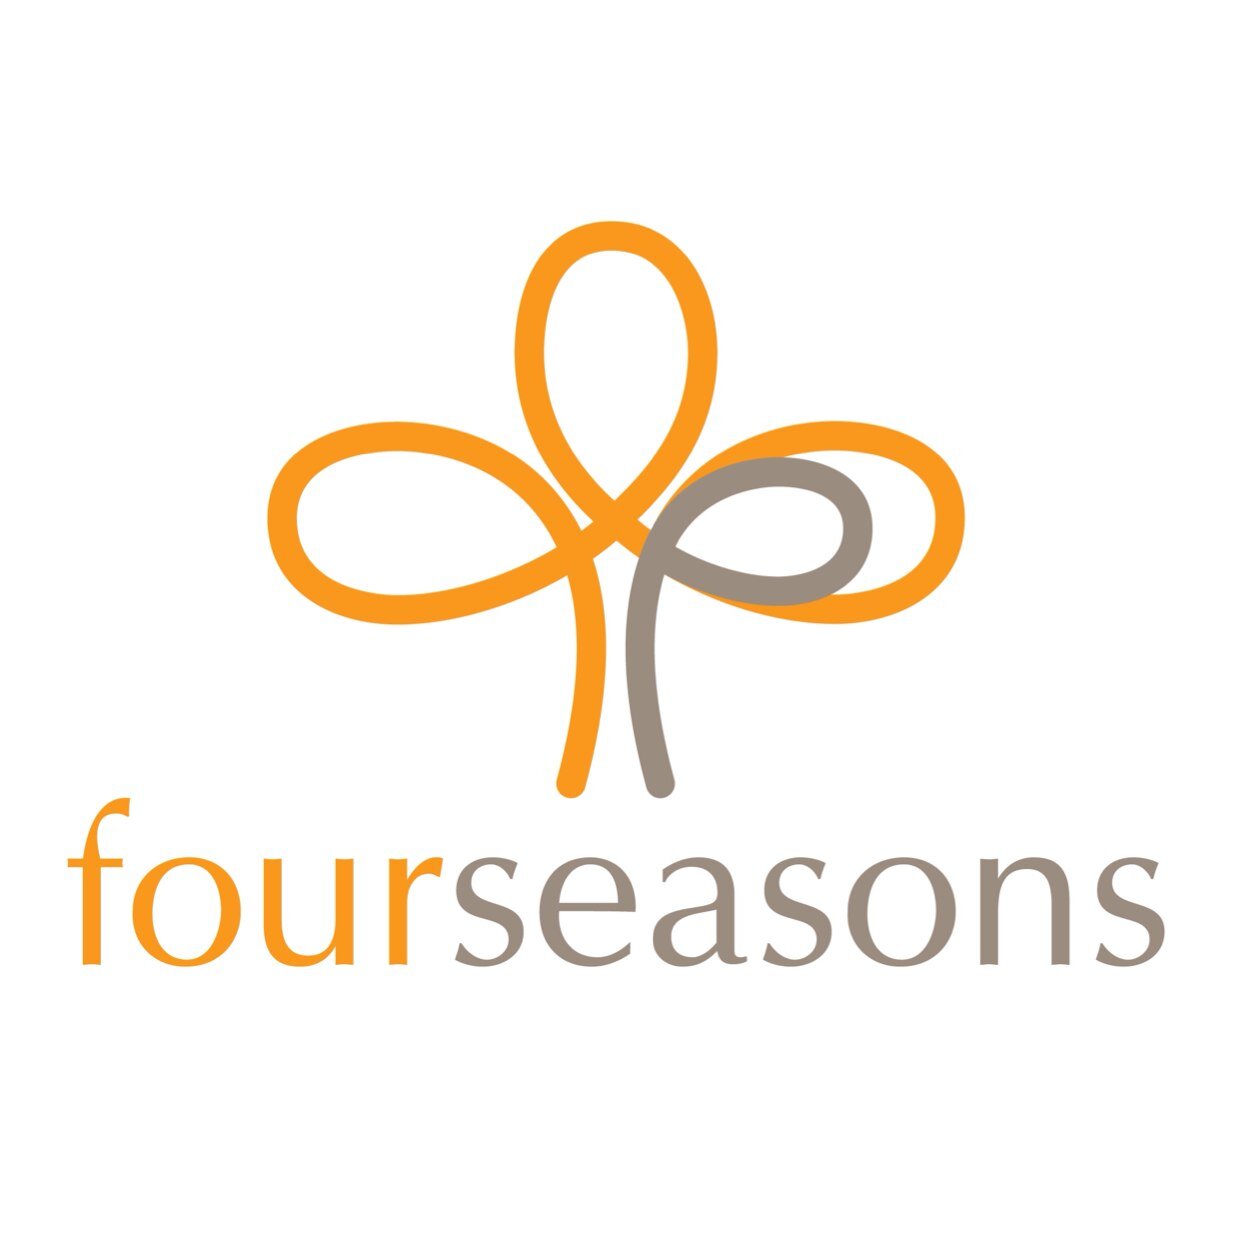 Four Seasons Group is a consortium of four distinctly positioned businesses–Four Seasons Catering, Gustos, City Gourmet and Zhong Zhong Ngoh Hiang.